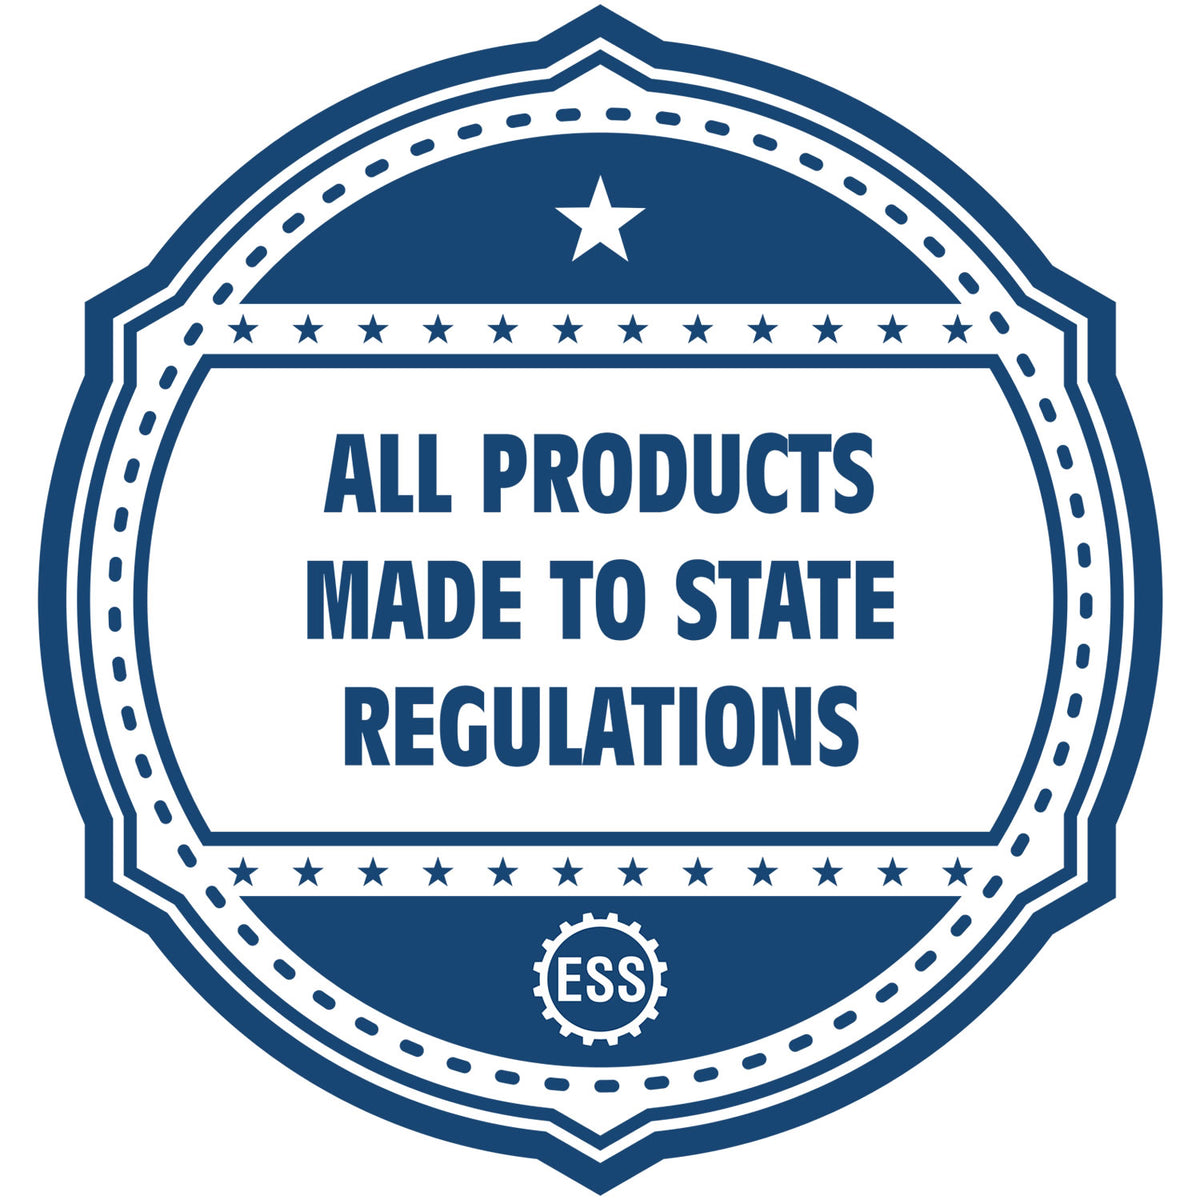 An icon or badge element for the Soft Kentucky Professional Engineer Seal showing that this product is made in compliance with state regulations.